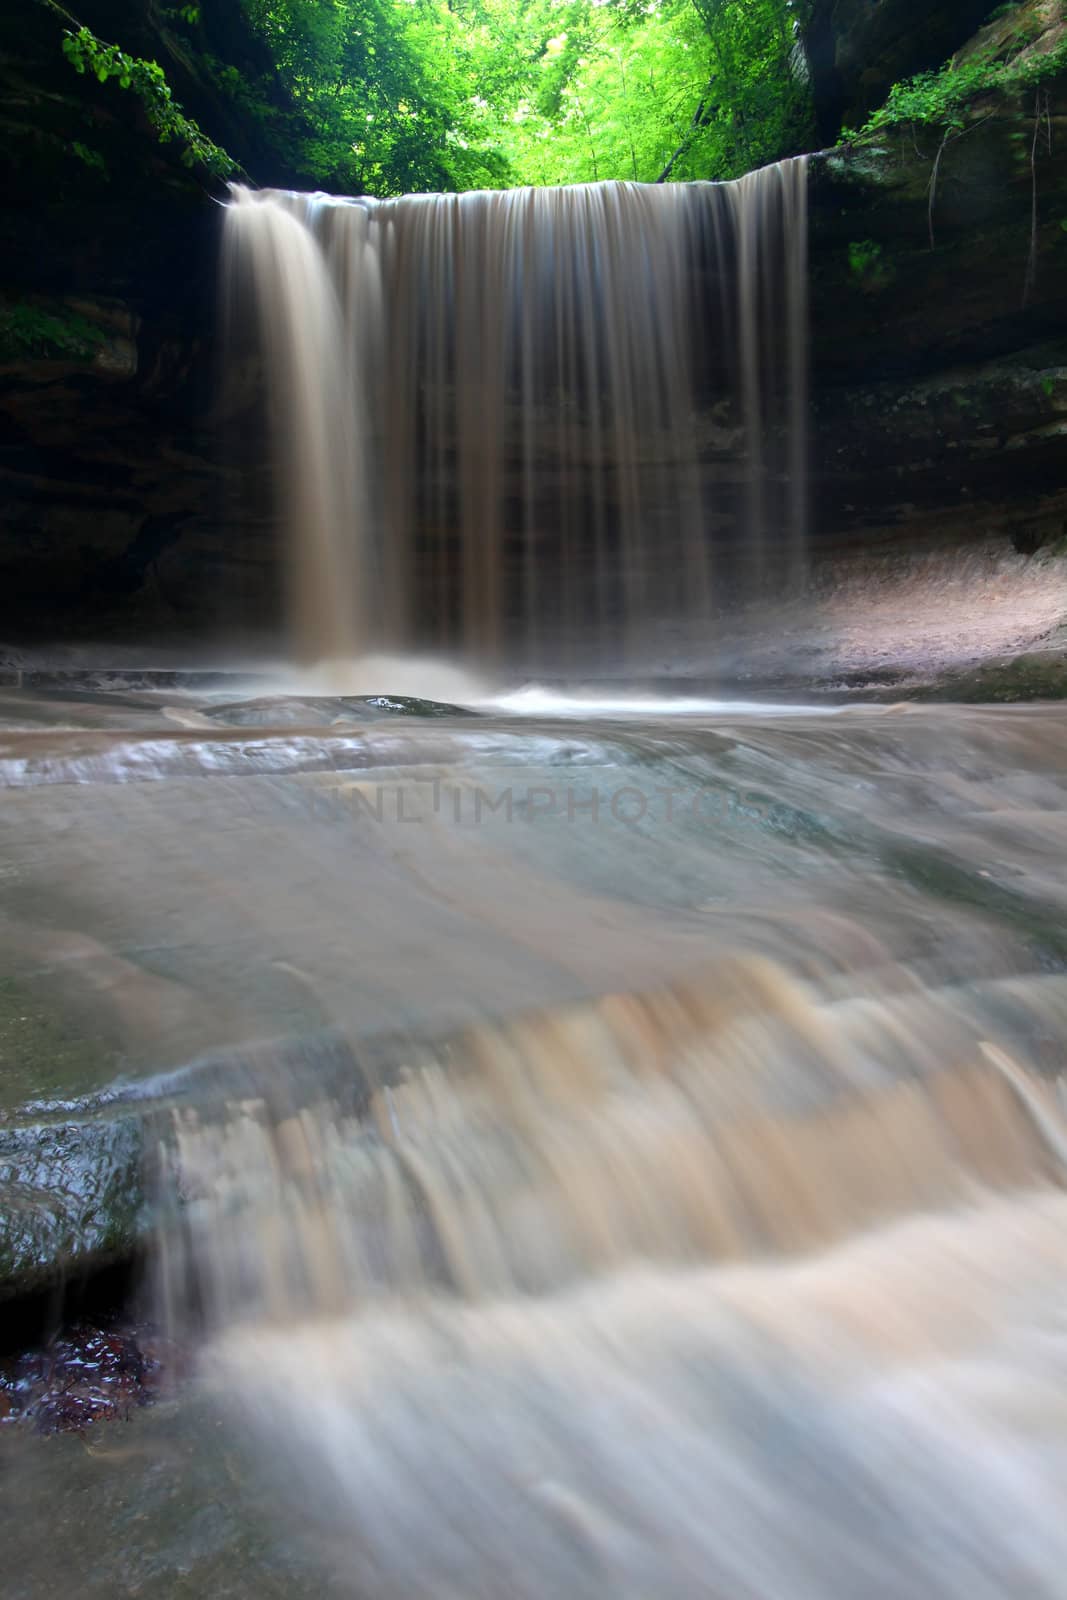 Spring rains create a beautiful scene at Lasalle Falls of Starved Rock State Park in central Illinois.